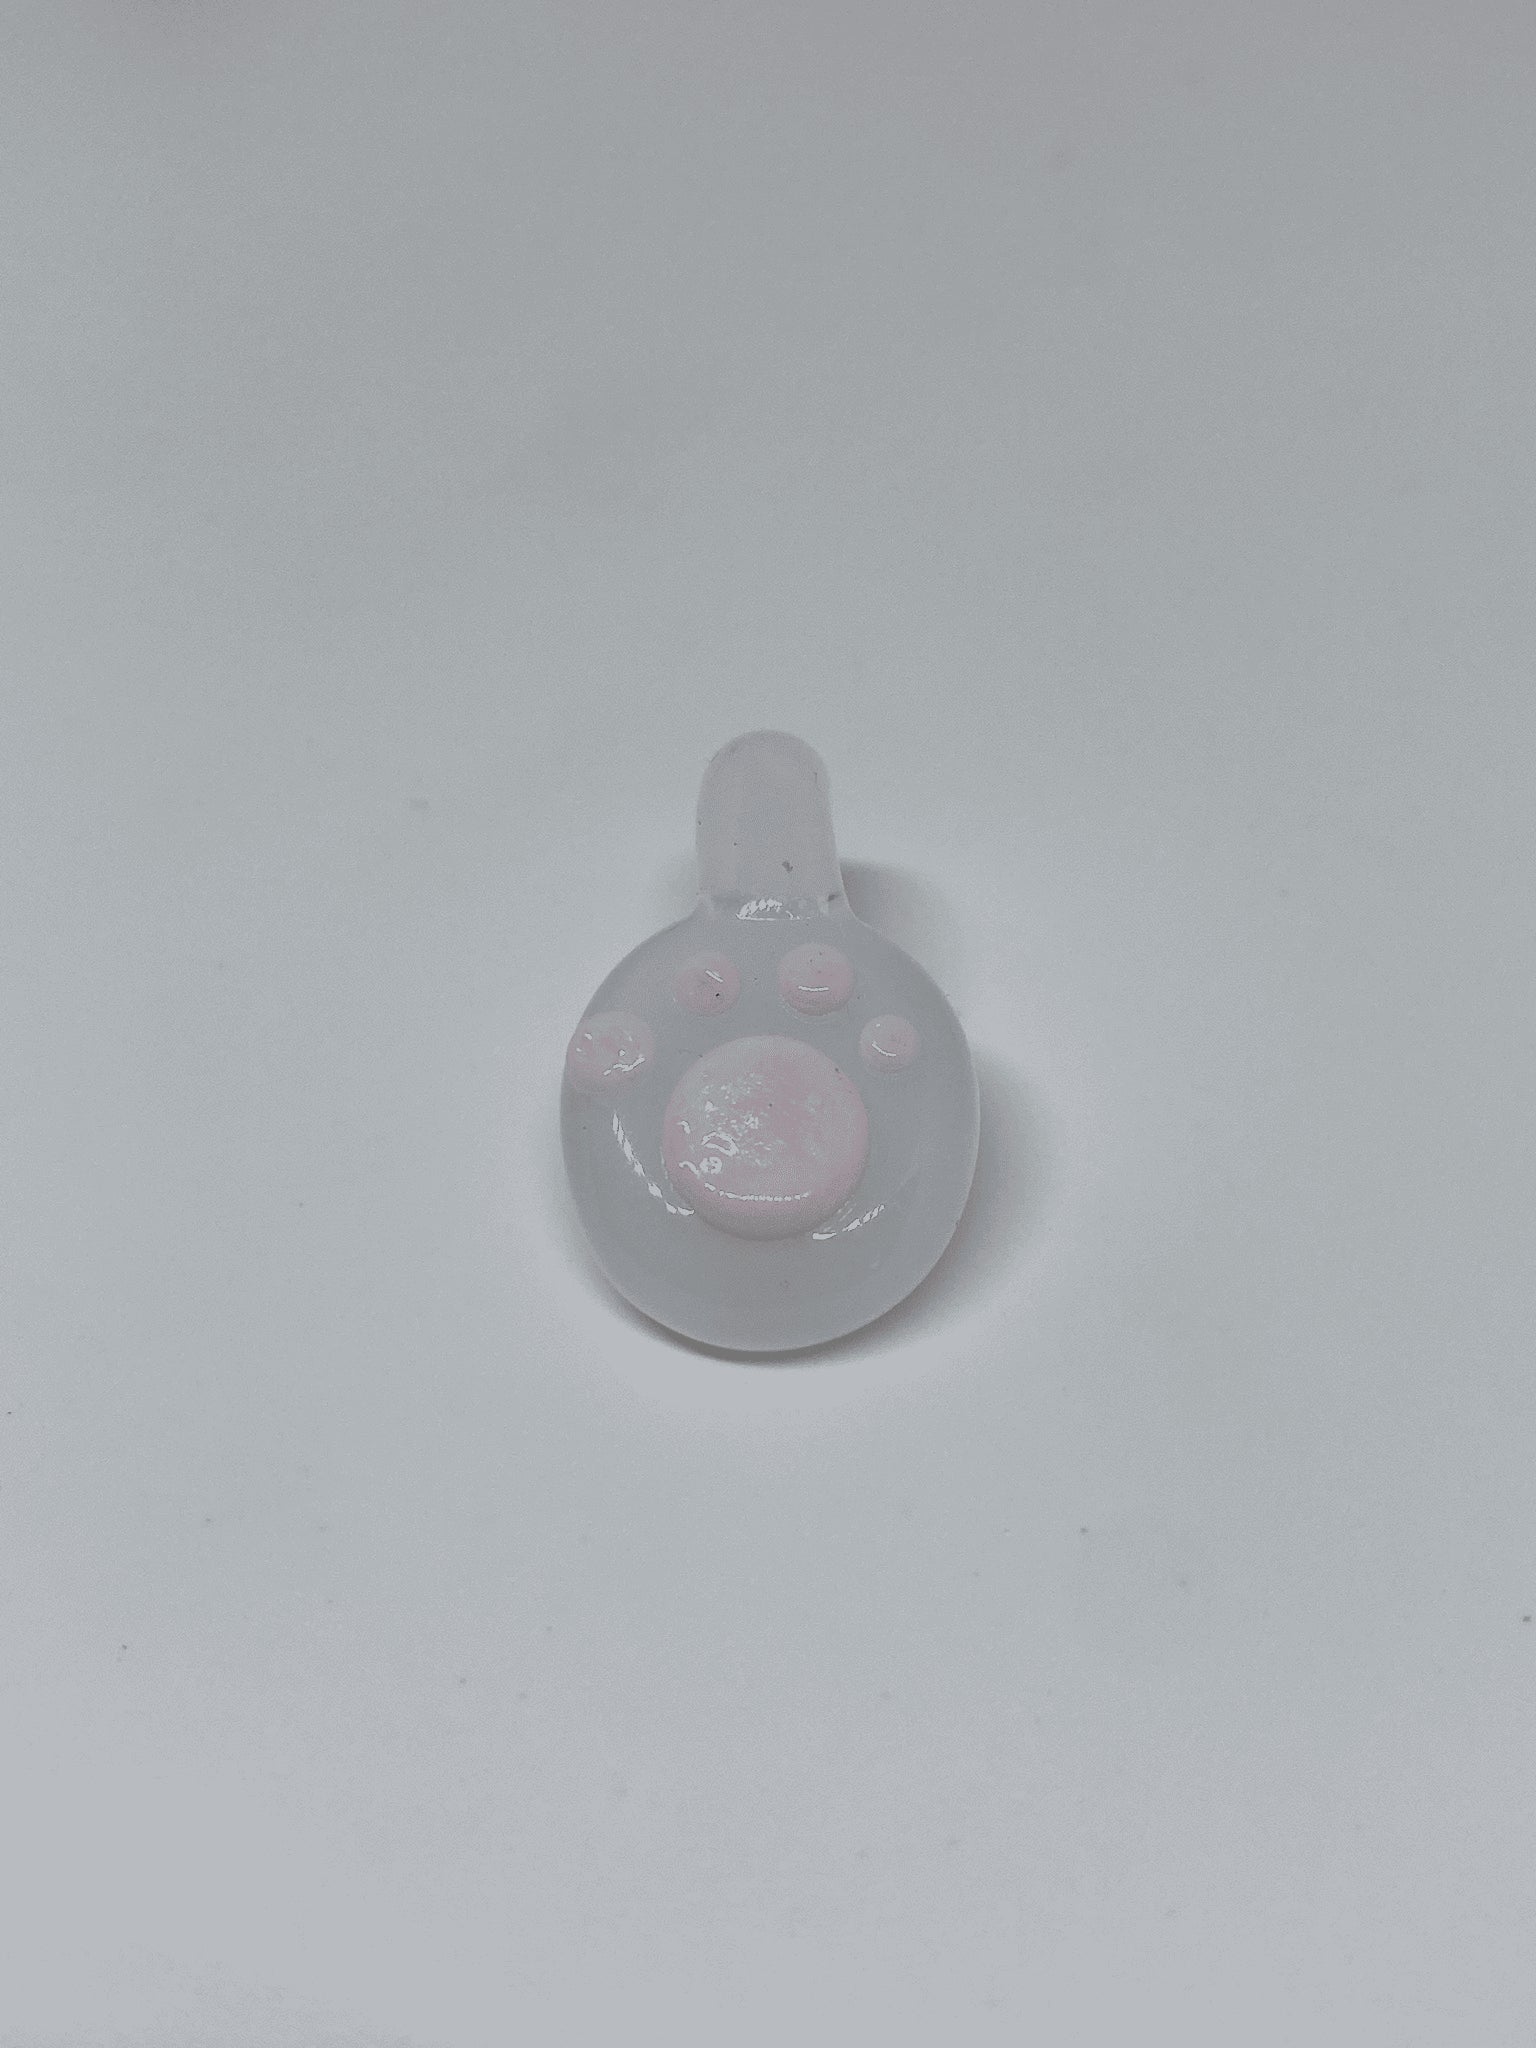 exquisite glass pendant - Jade White Pet Paw Pendant by Alexander The Great Glass